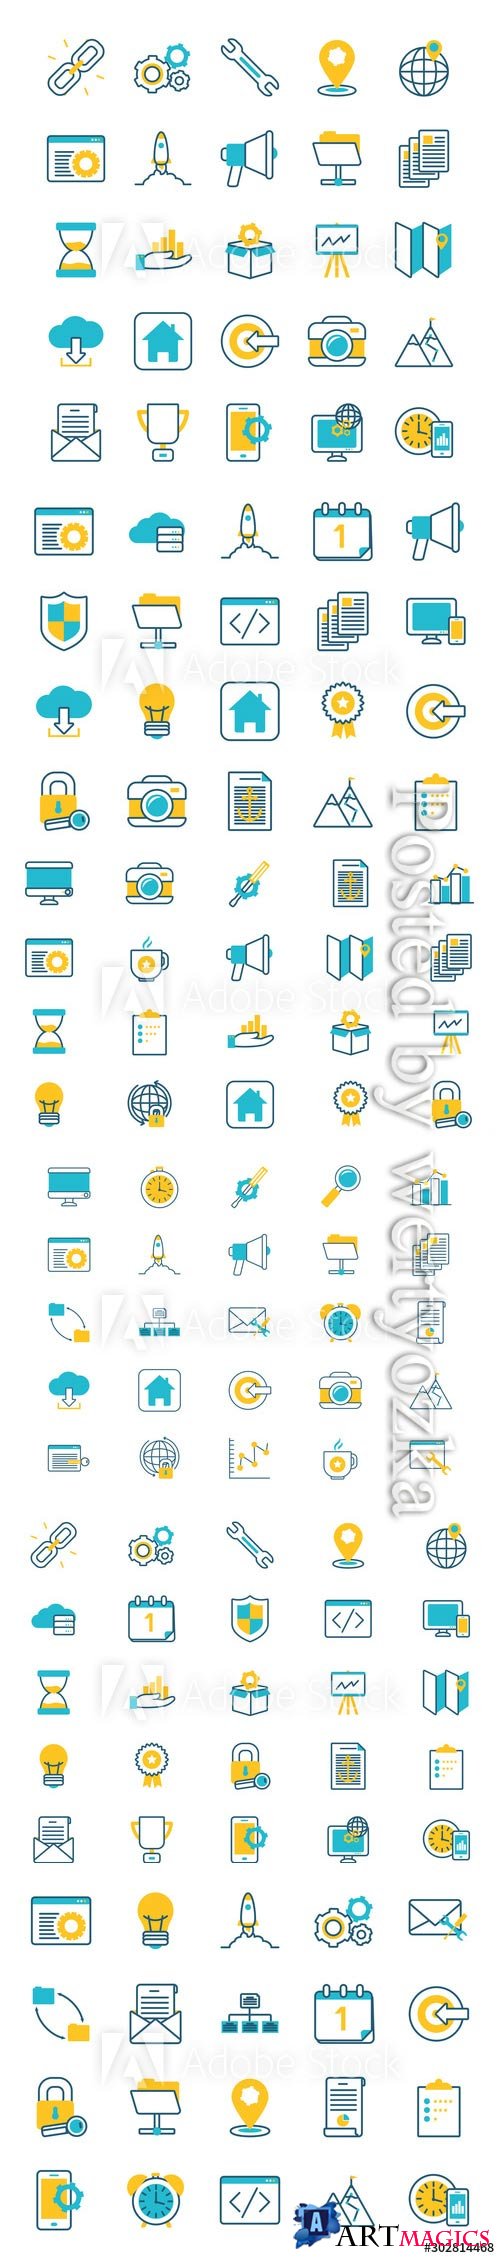 Elearning and business set icons